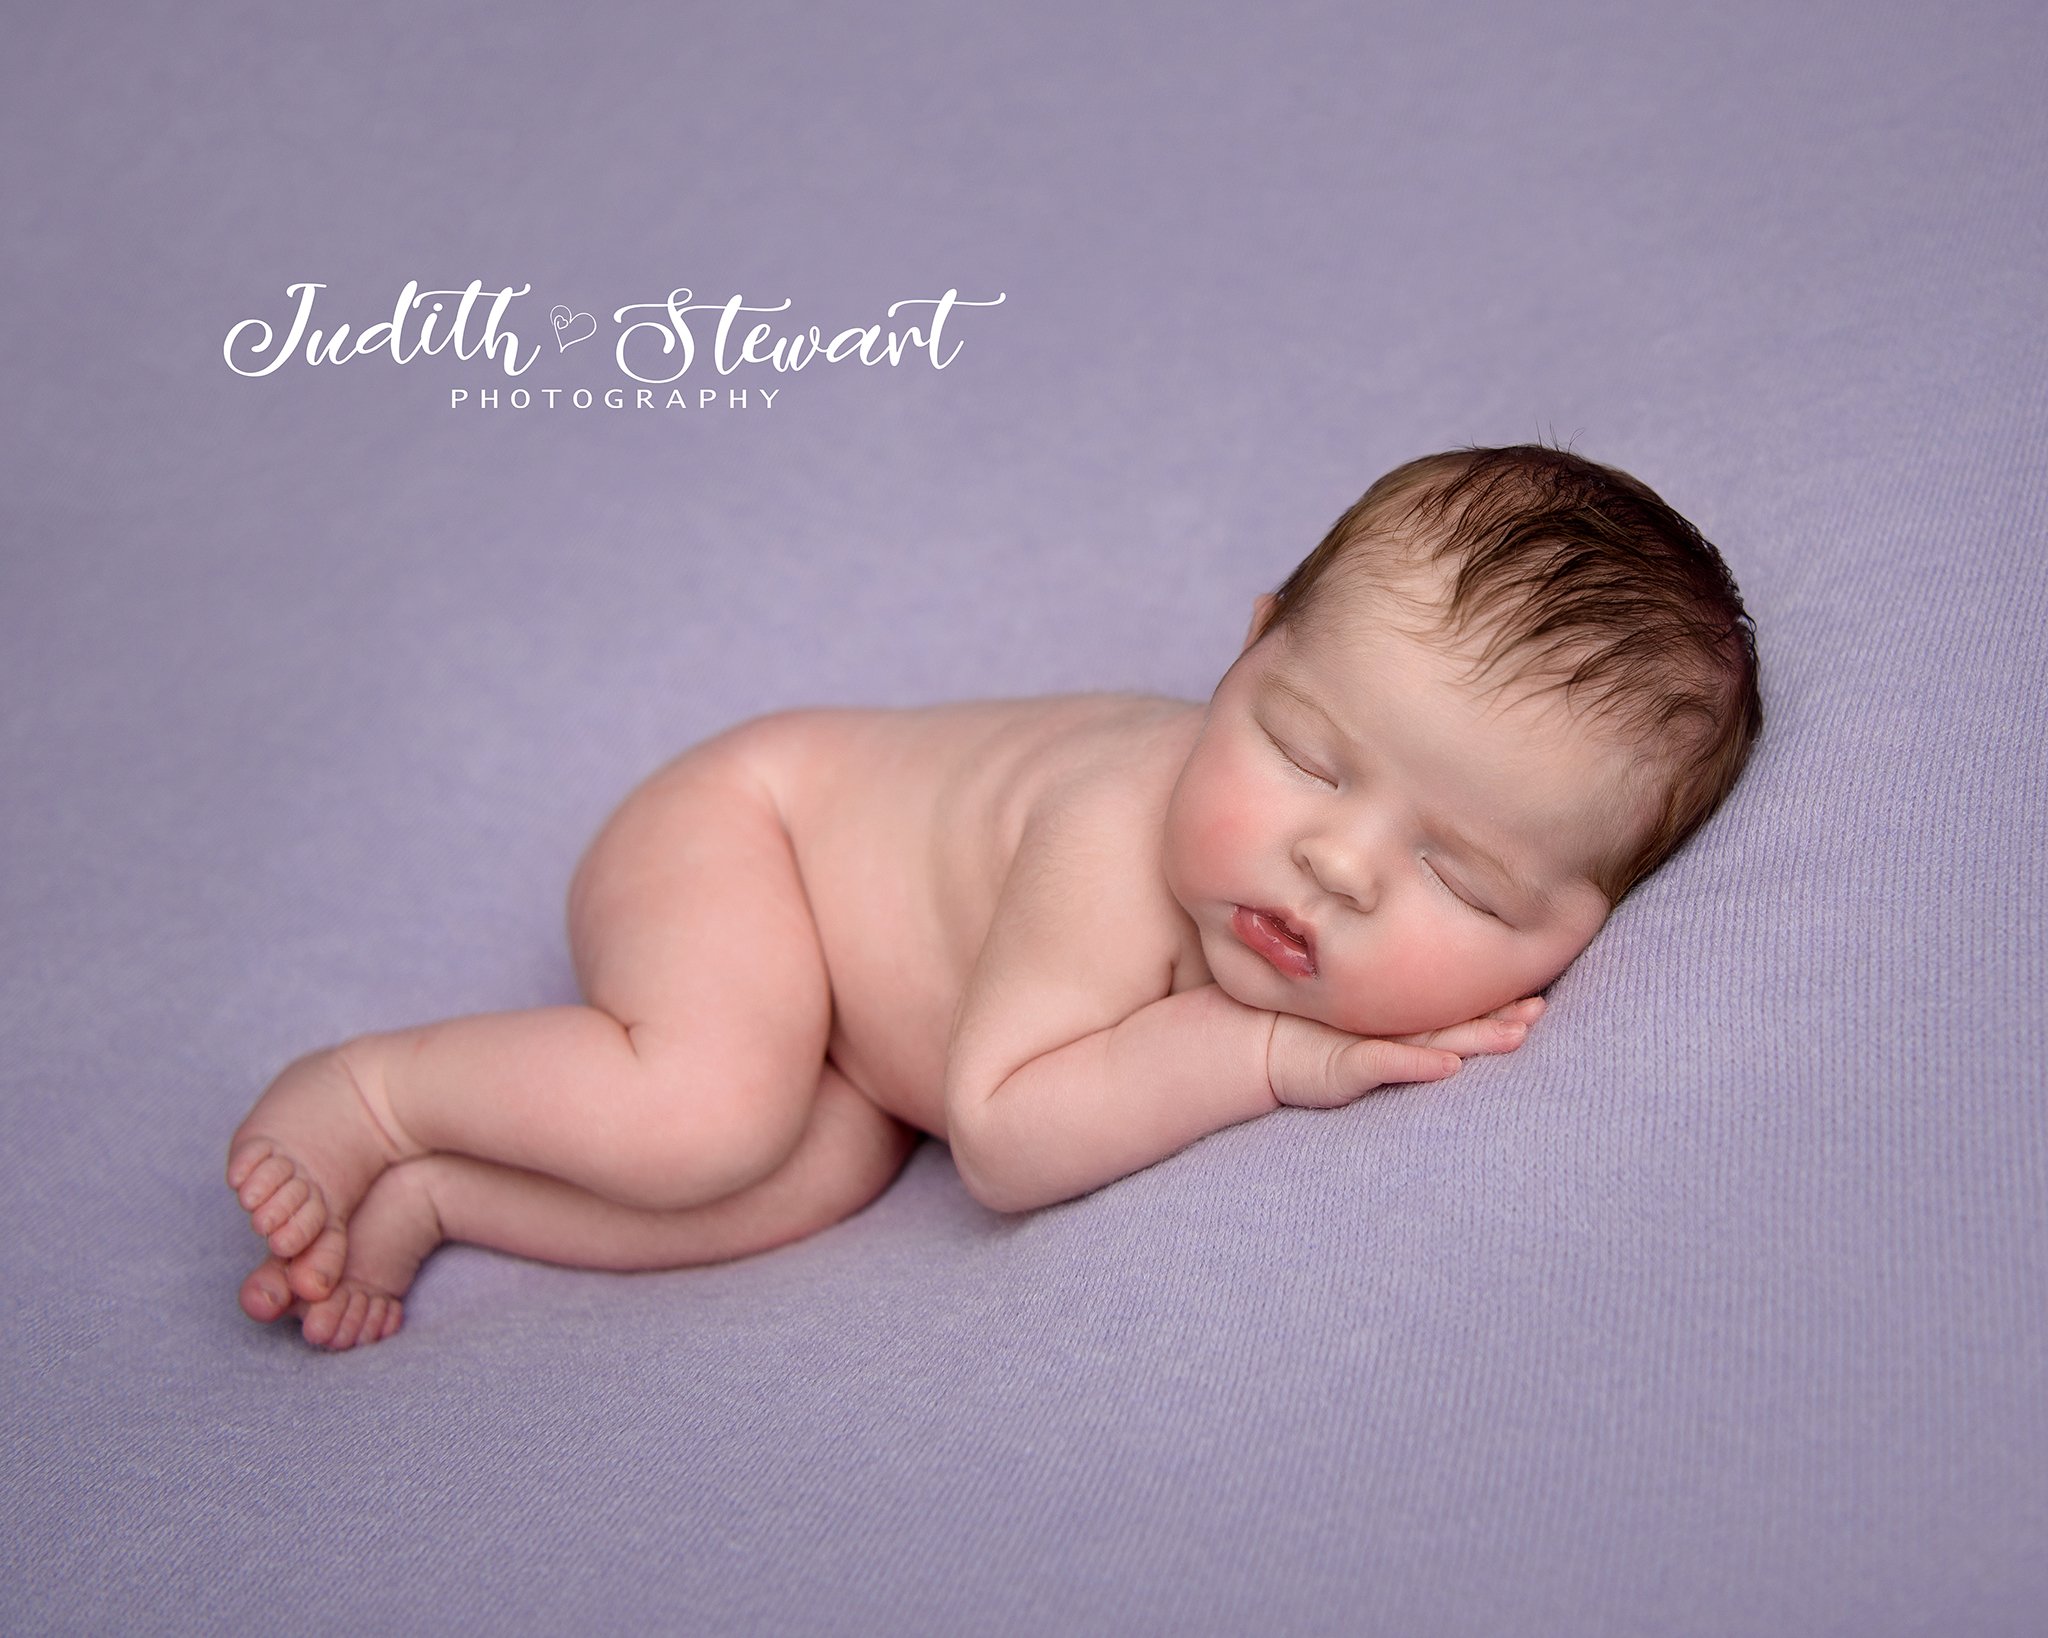  newborn on lilac in studio in uckfield east sussex with judith stewart baby photographer 